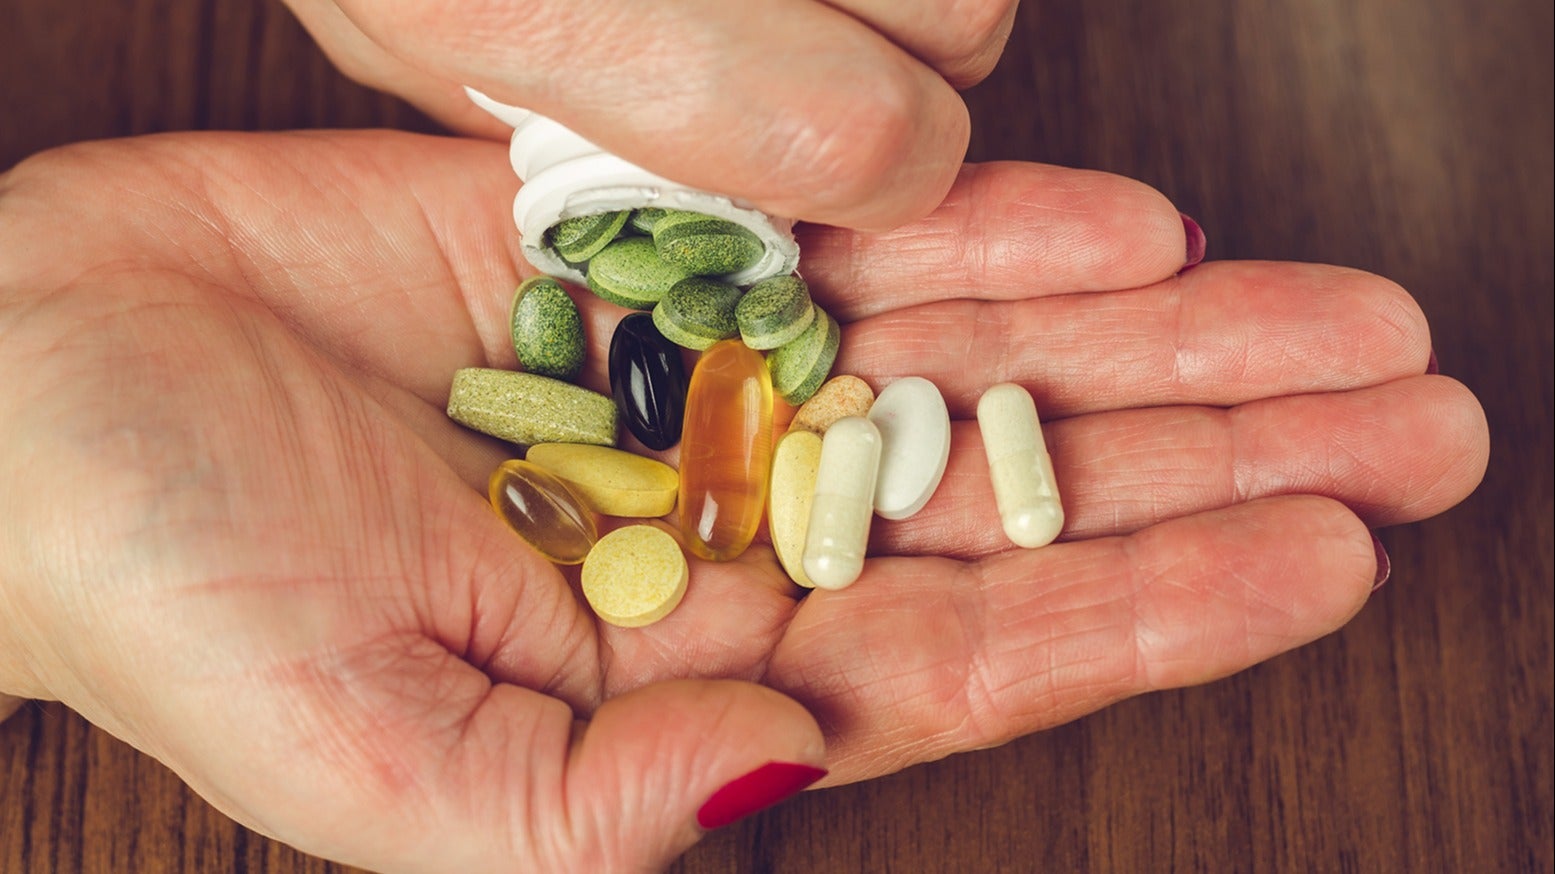 The 8 Best Supplements to Take If You're Vegan - GoodRx